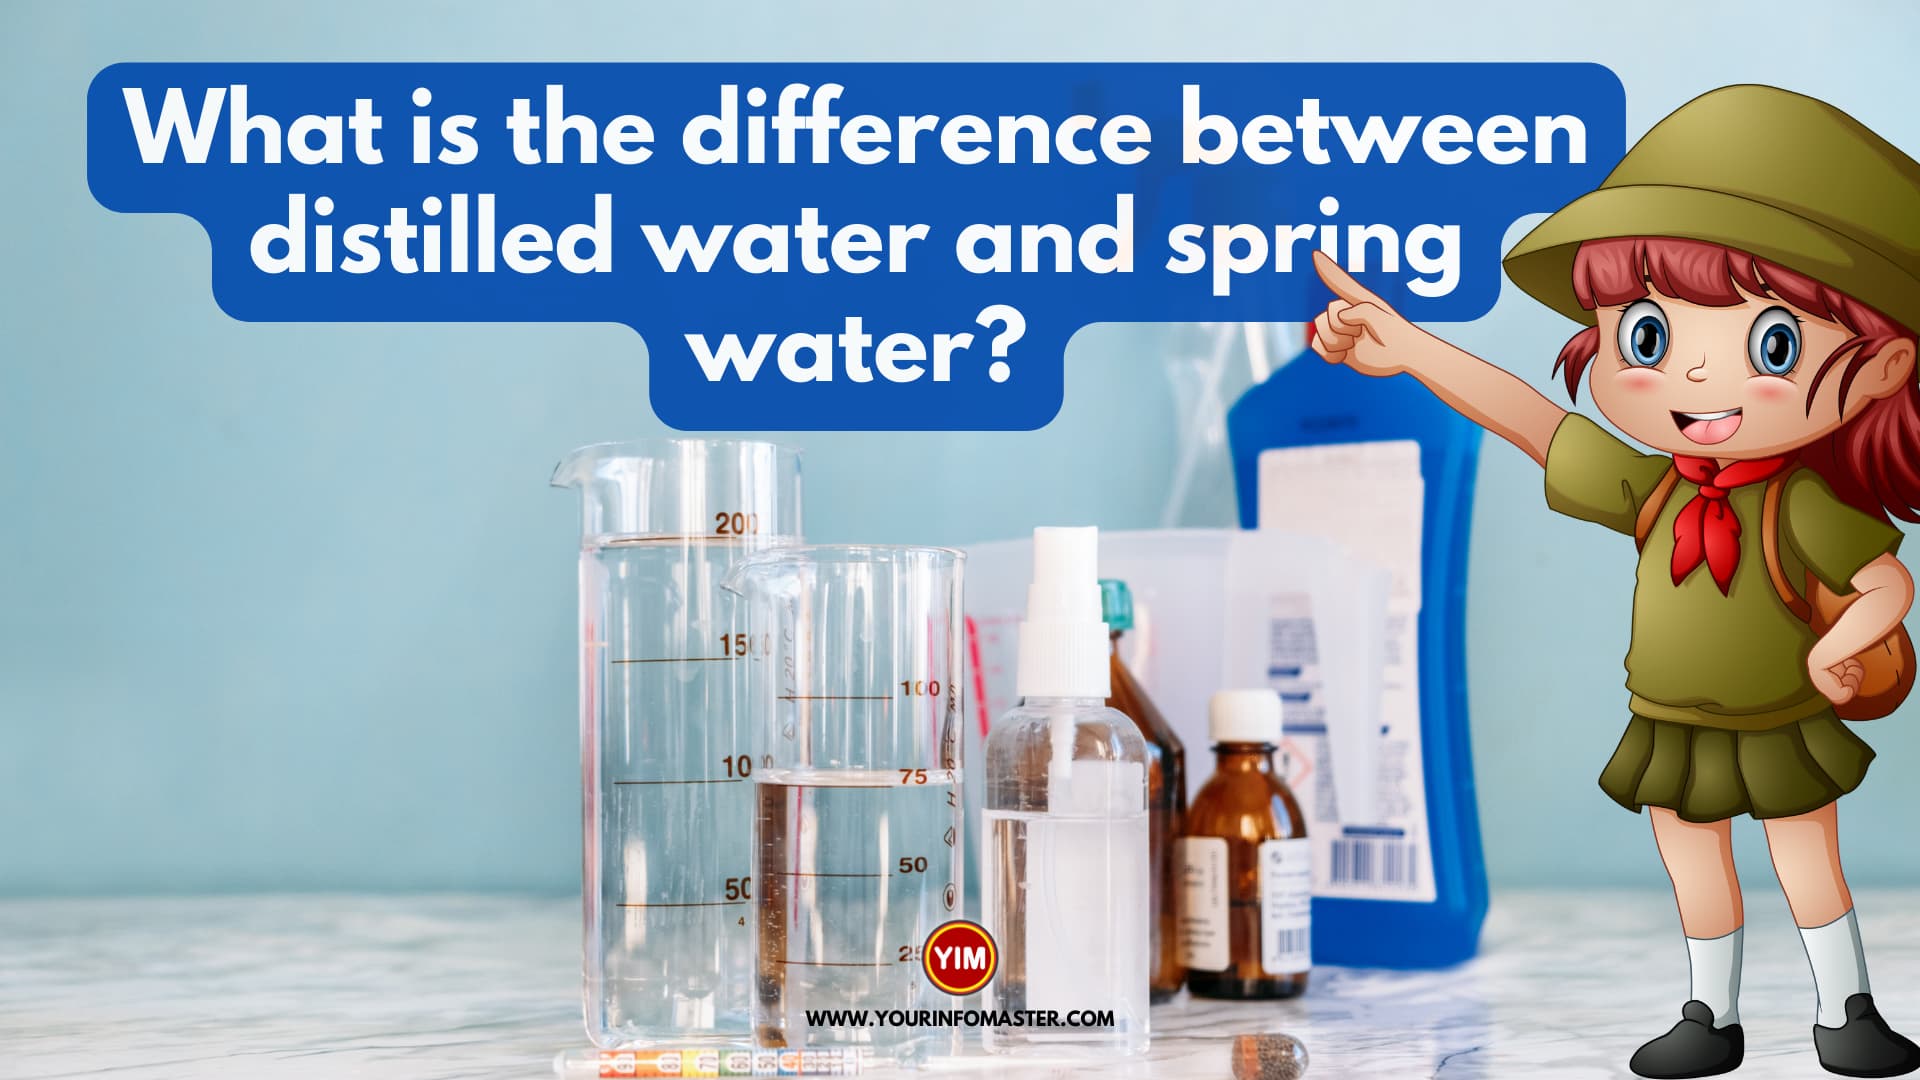 What is the difference between distilled water and spring water